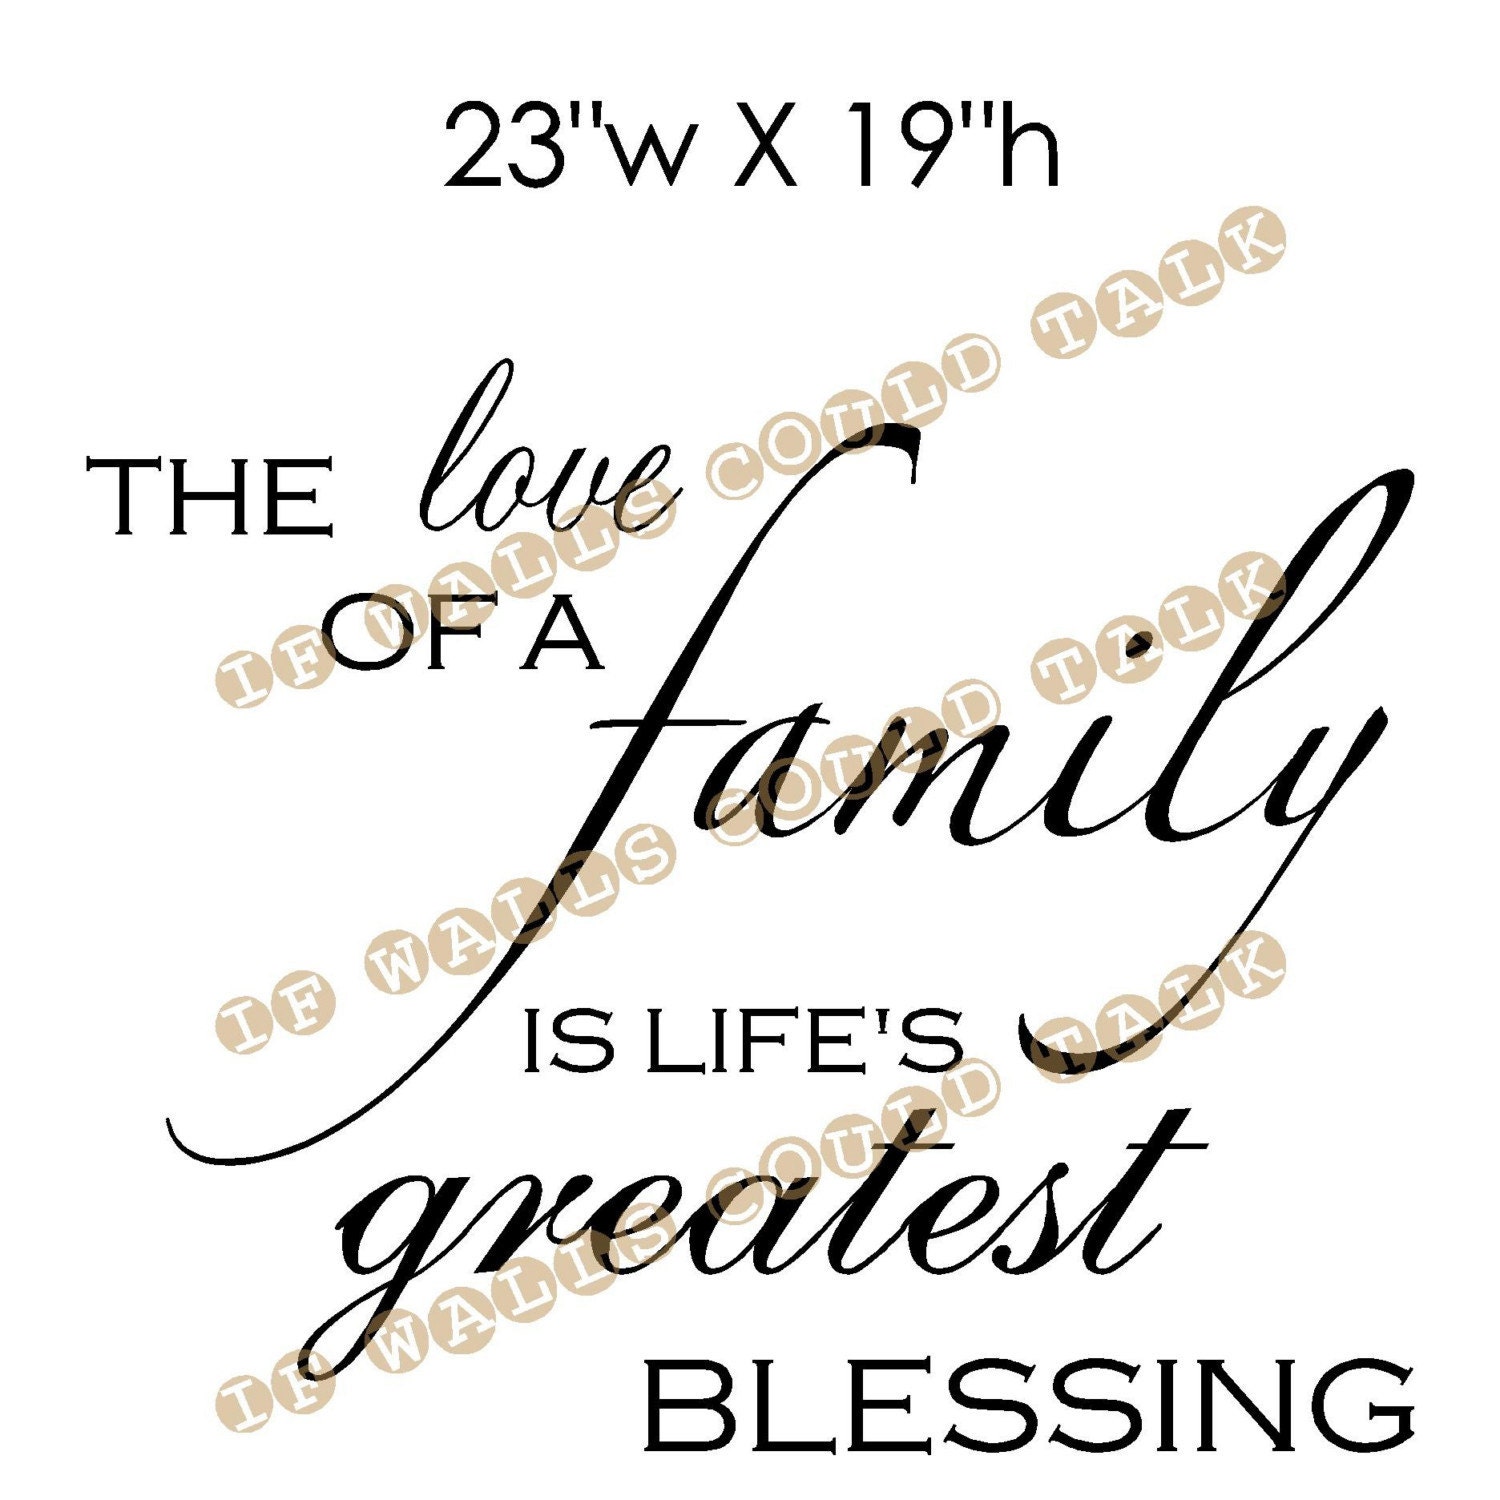 Family And Friend Quotes Short Love of a family quote vinyl wall decal by melanieastewart